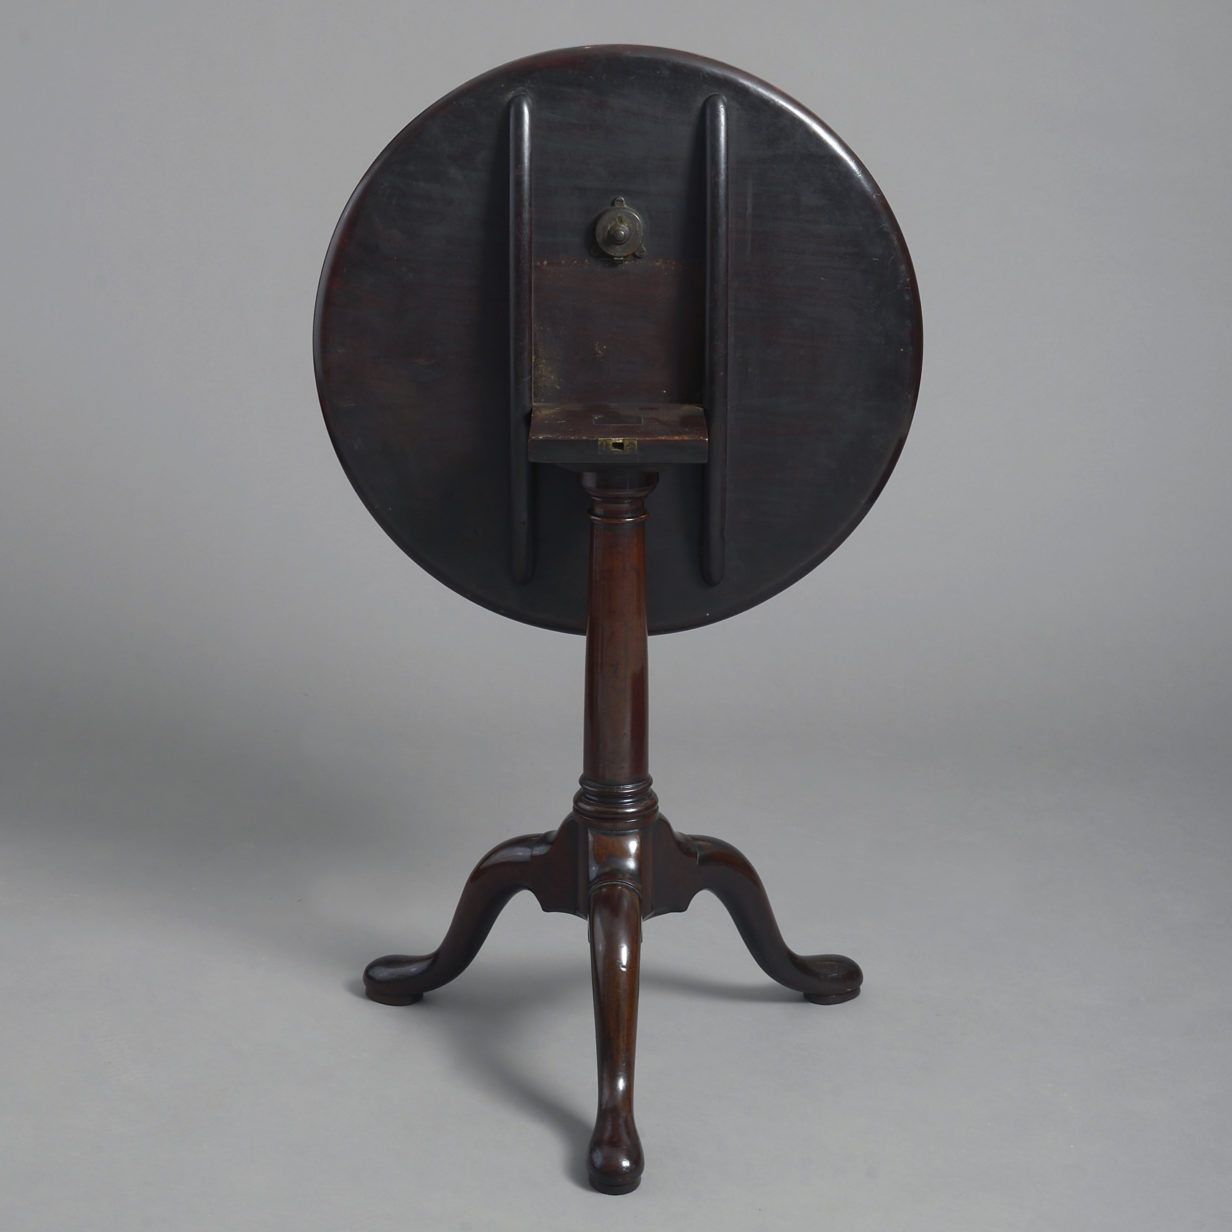 An 18th Century George Ii Period Mahogany Tripod Table Intended For Console Tables With Tripod Legs (View 11 of 20)